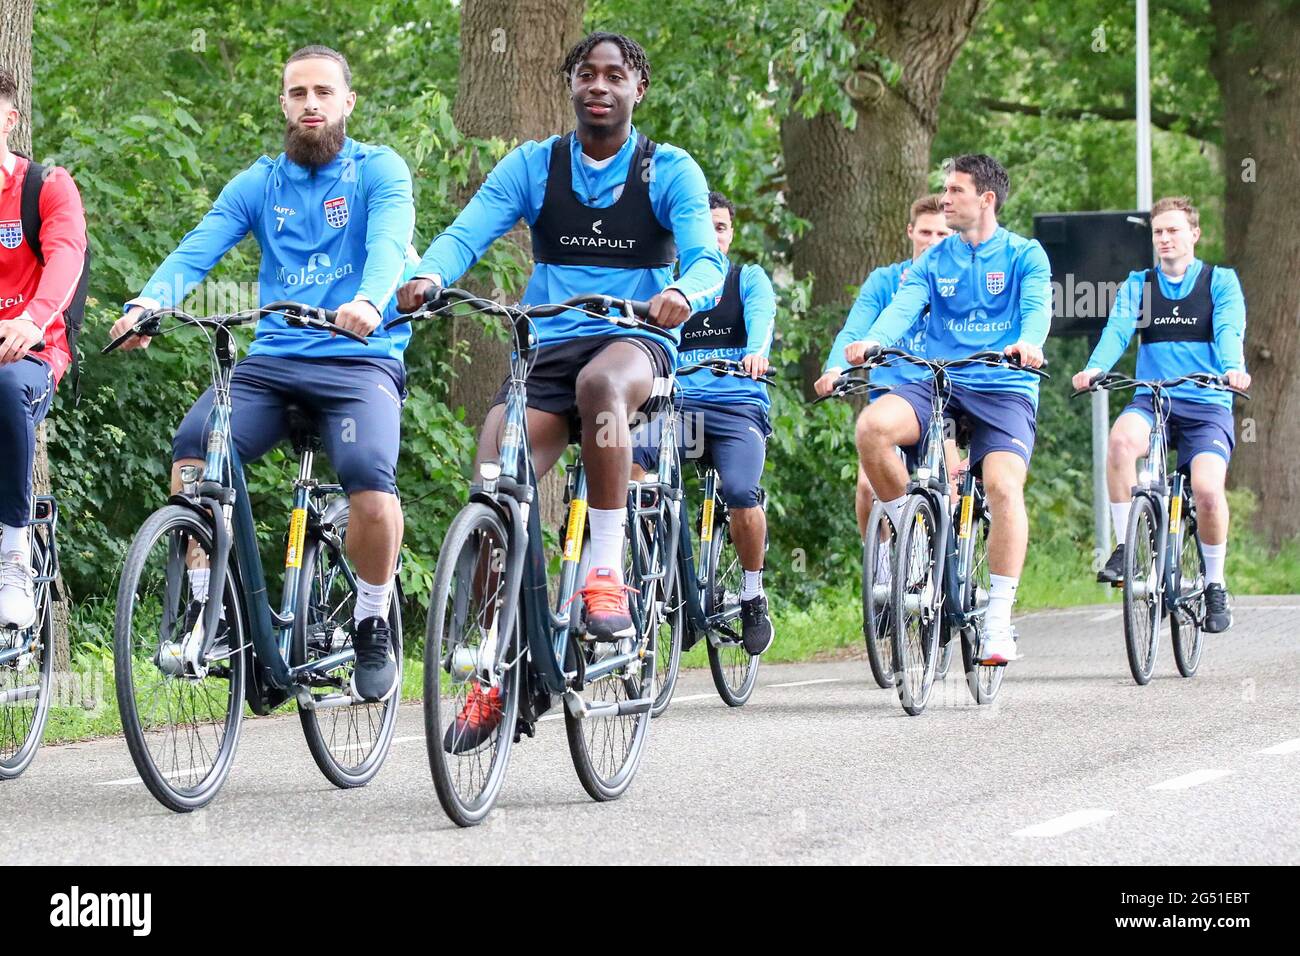 ZWOLLE, NETHERLANDS - JUNE 24: Destan Bajselmani of Pec Zwolle, Chardi Landu of PEC Zwolle, Pelle Clement of PEC Zwolle during the first First training of the season of PEC Zwolle of season 2021-2022 at Sportpark de Elshof on June 24, 2021 in Zwolle, Netherlands. (Photo by Ben Gal/Orange Pictures) Stock Photo